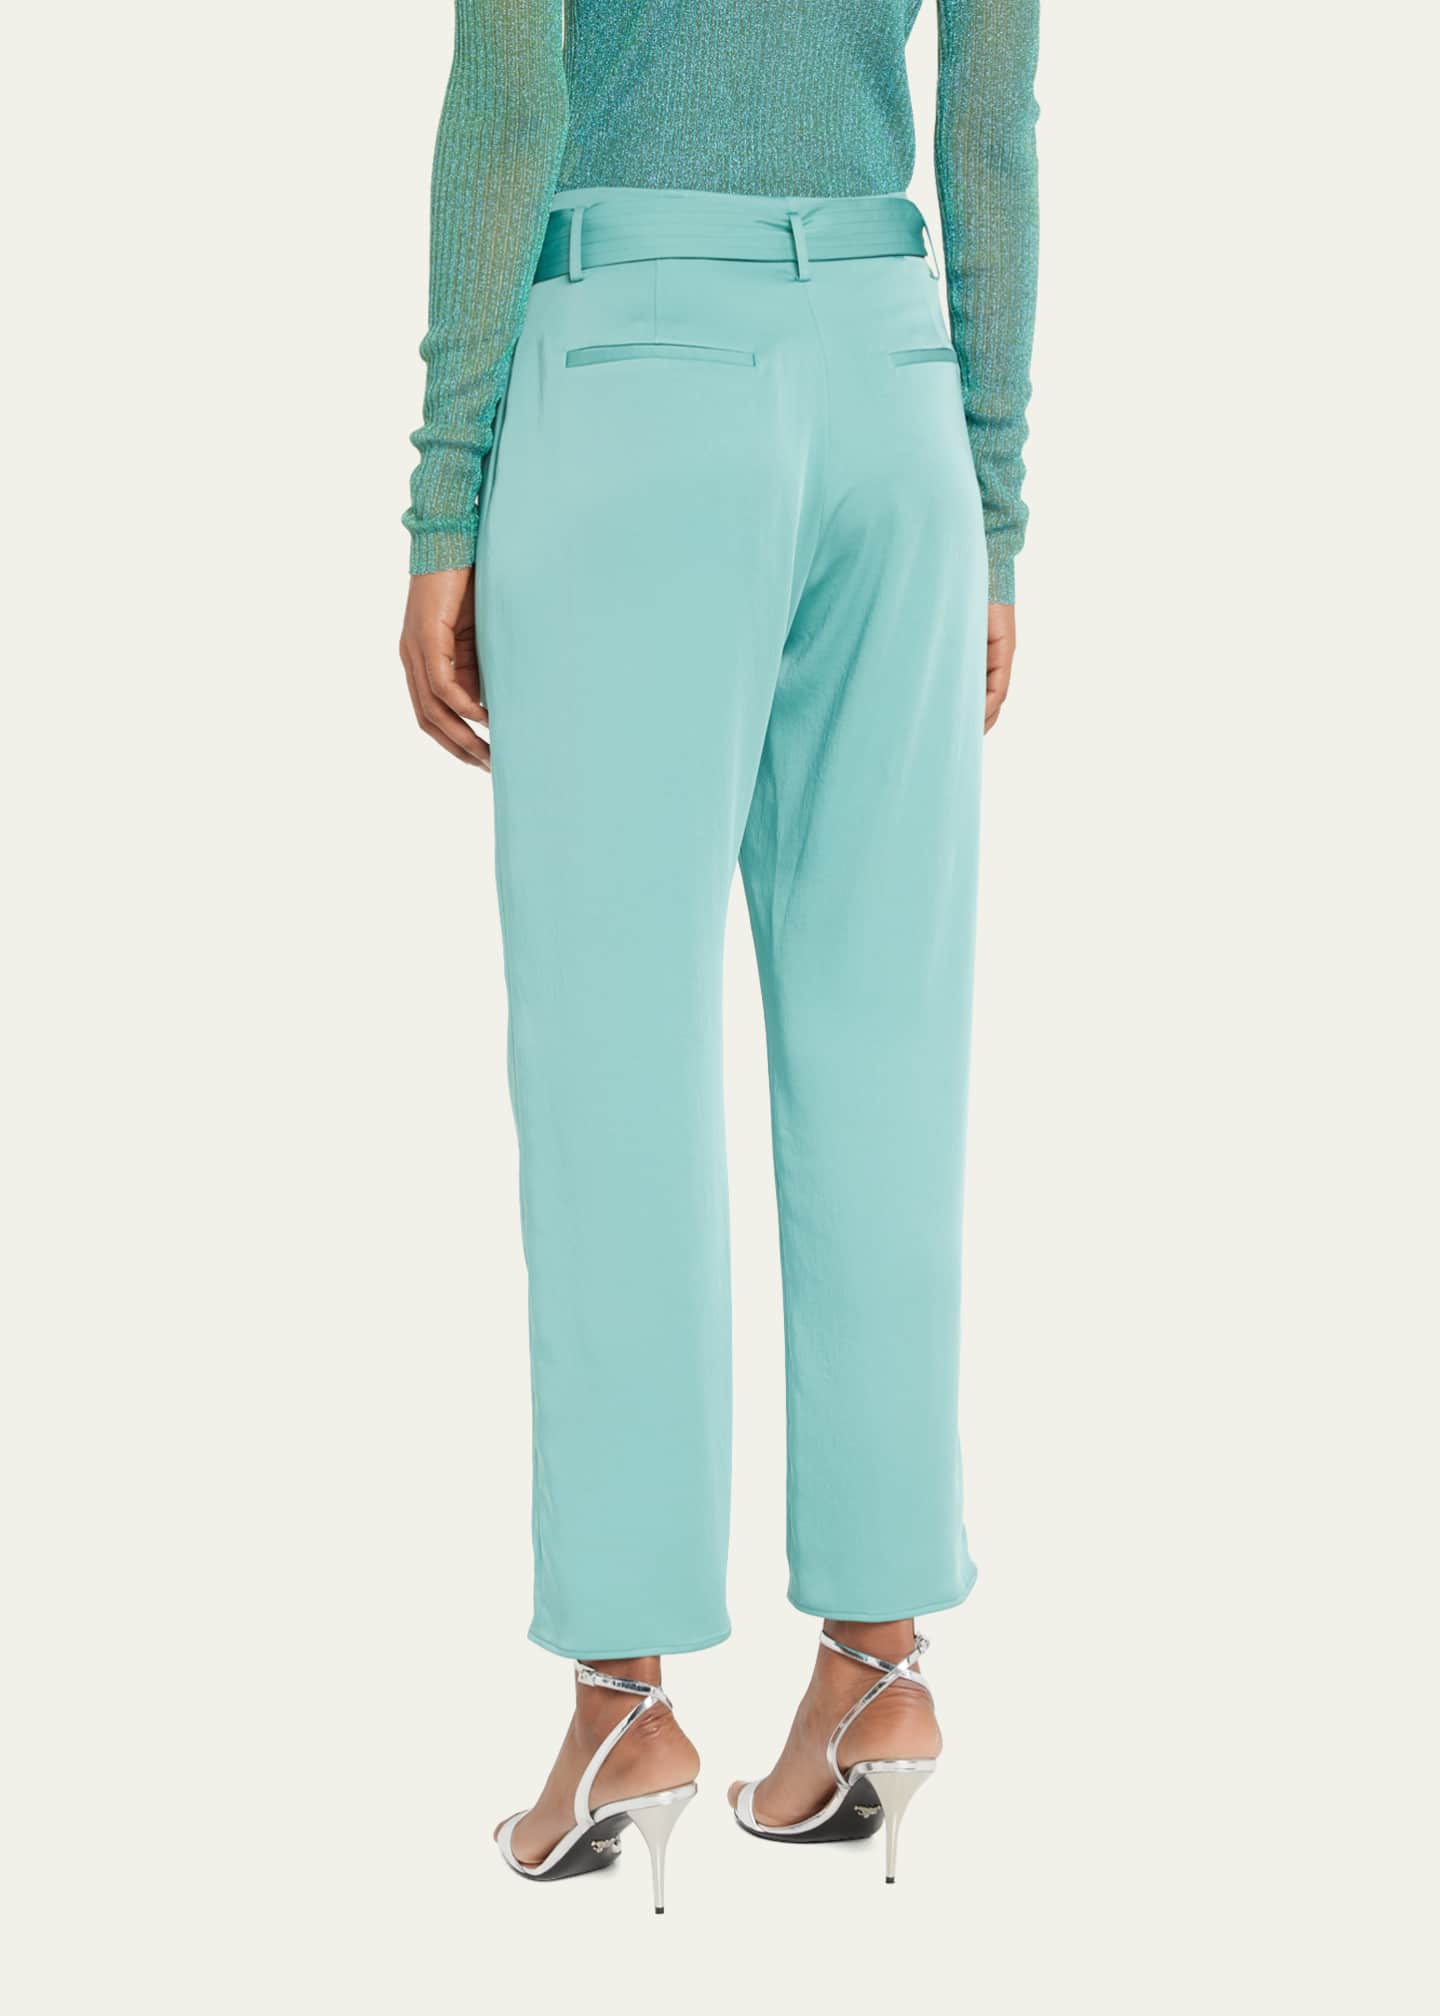 LAPOINTE Satin Cropped Trousers with Belted Waist - Bergdorf Goodman